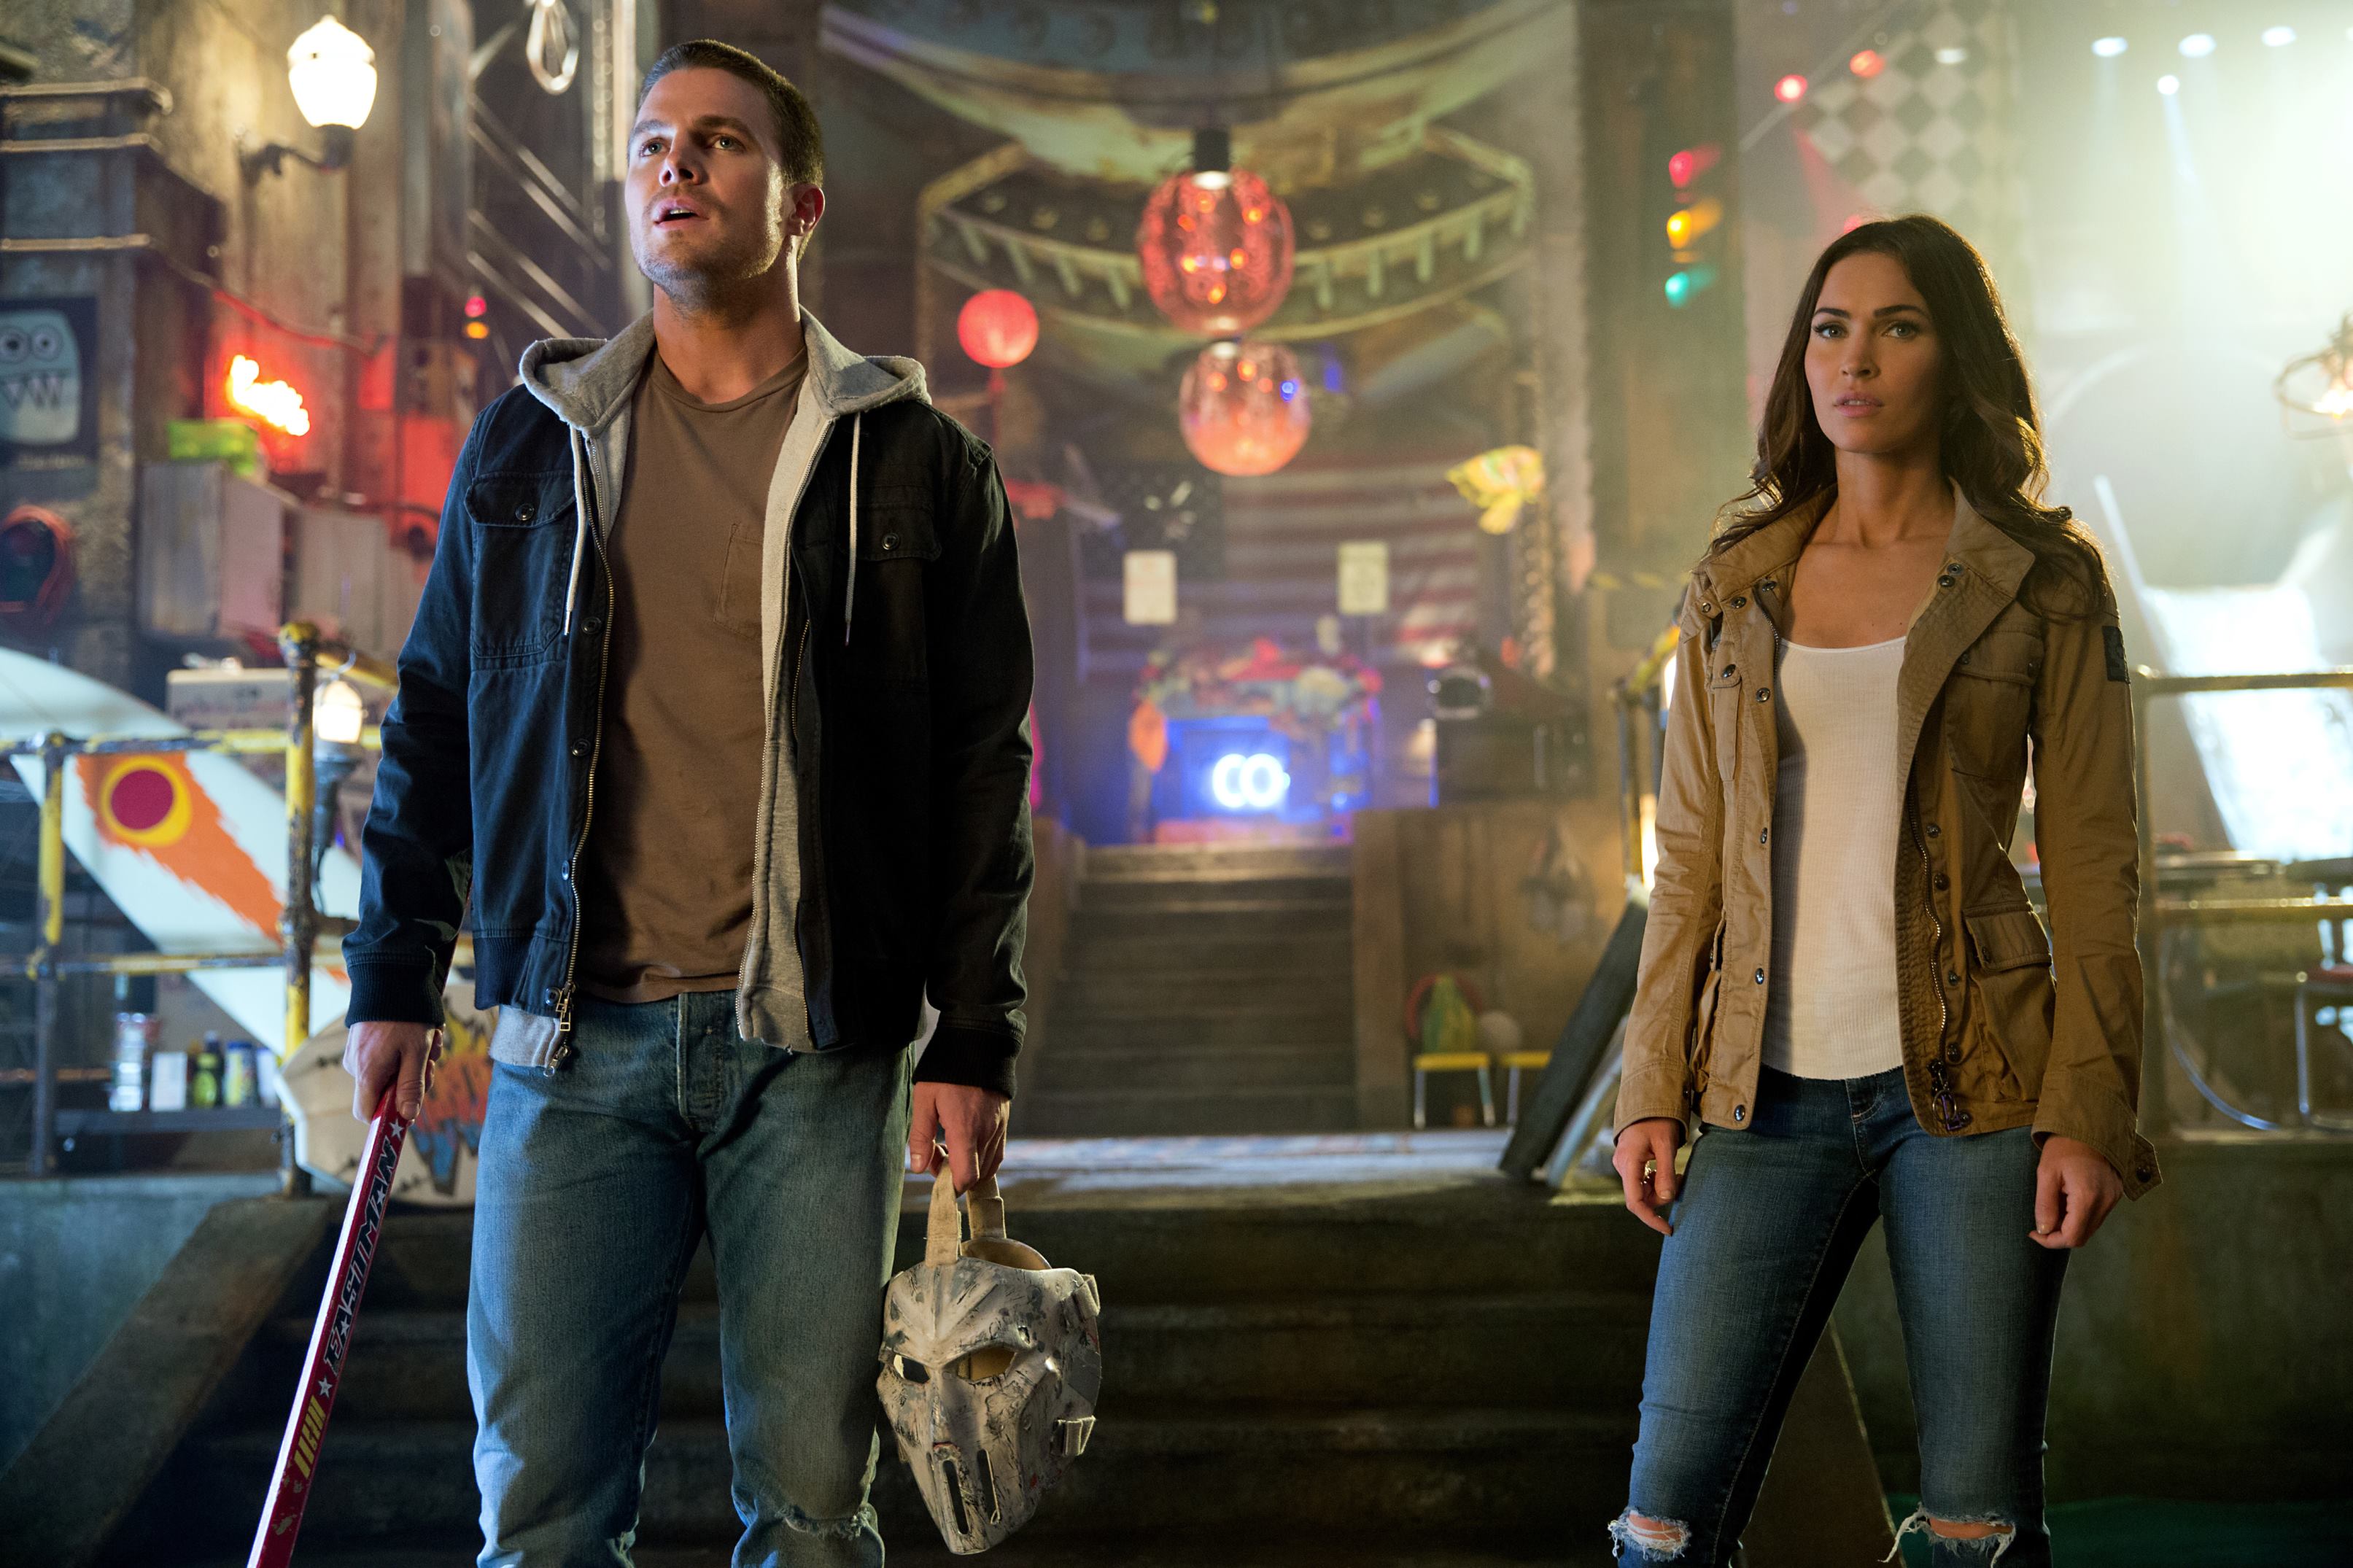 Left to right: Stephen Amell as Casey Jones and Megan Fox as April O'Neil in Teenage Mutant Ninja Turtles: Out of the Shadows from Paramount Pictures, Nickelodeon Movies and Platinum Dunes